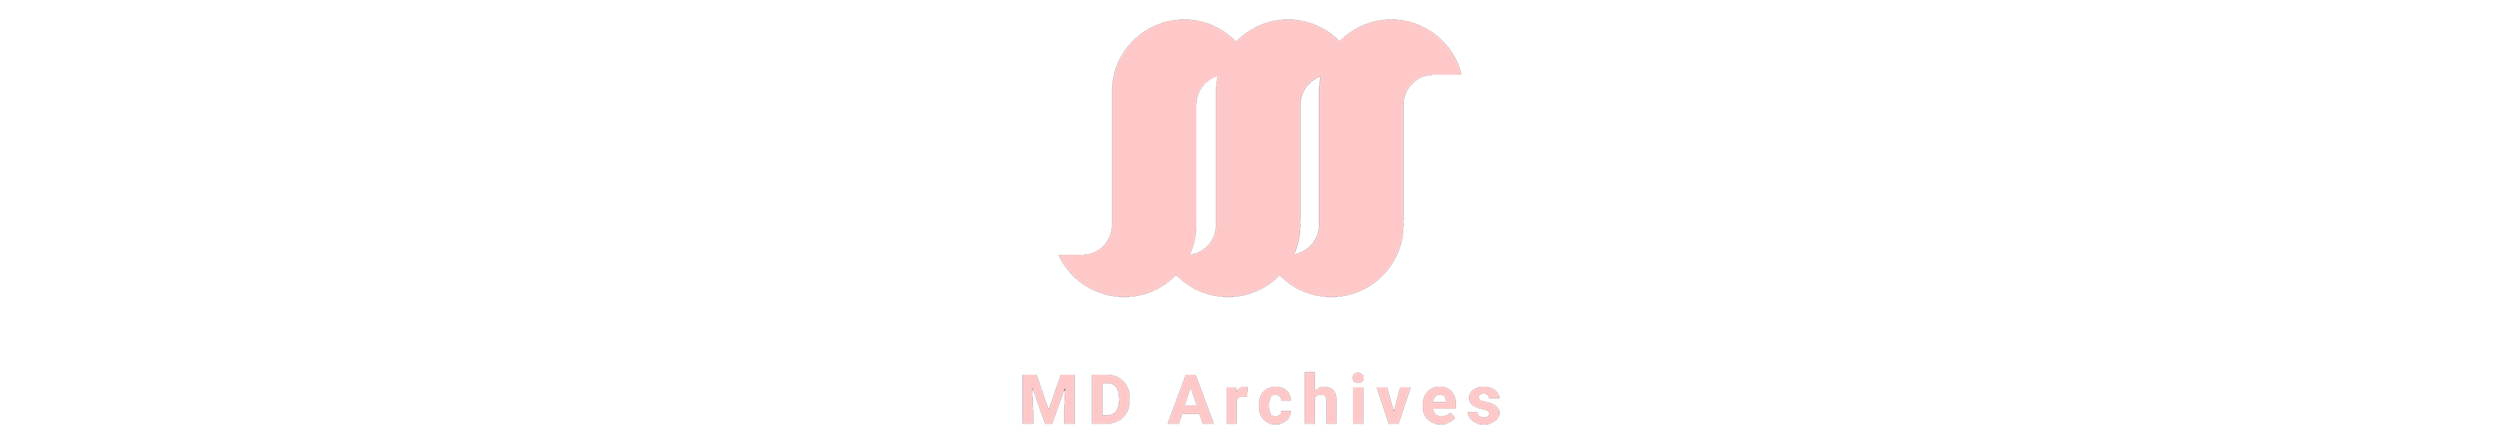 MD Archives